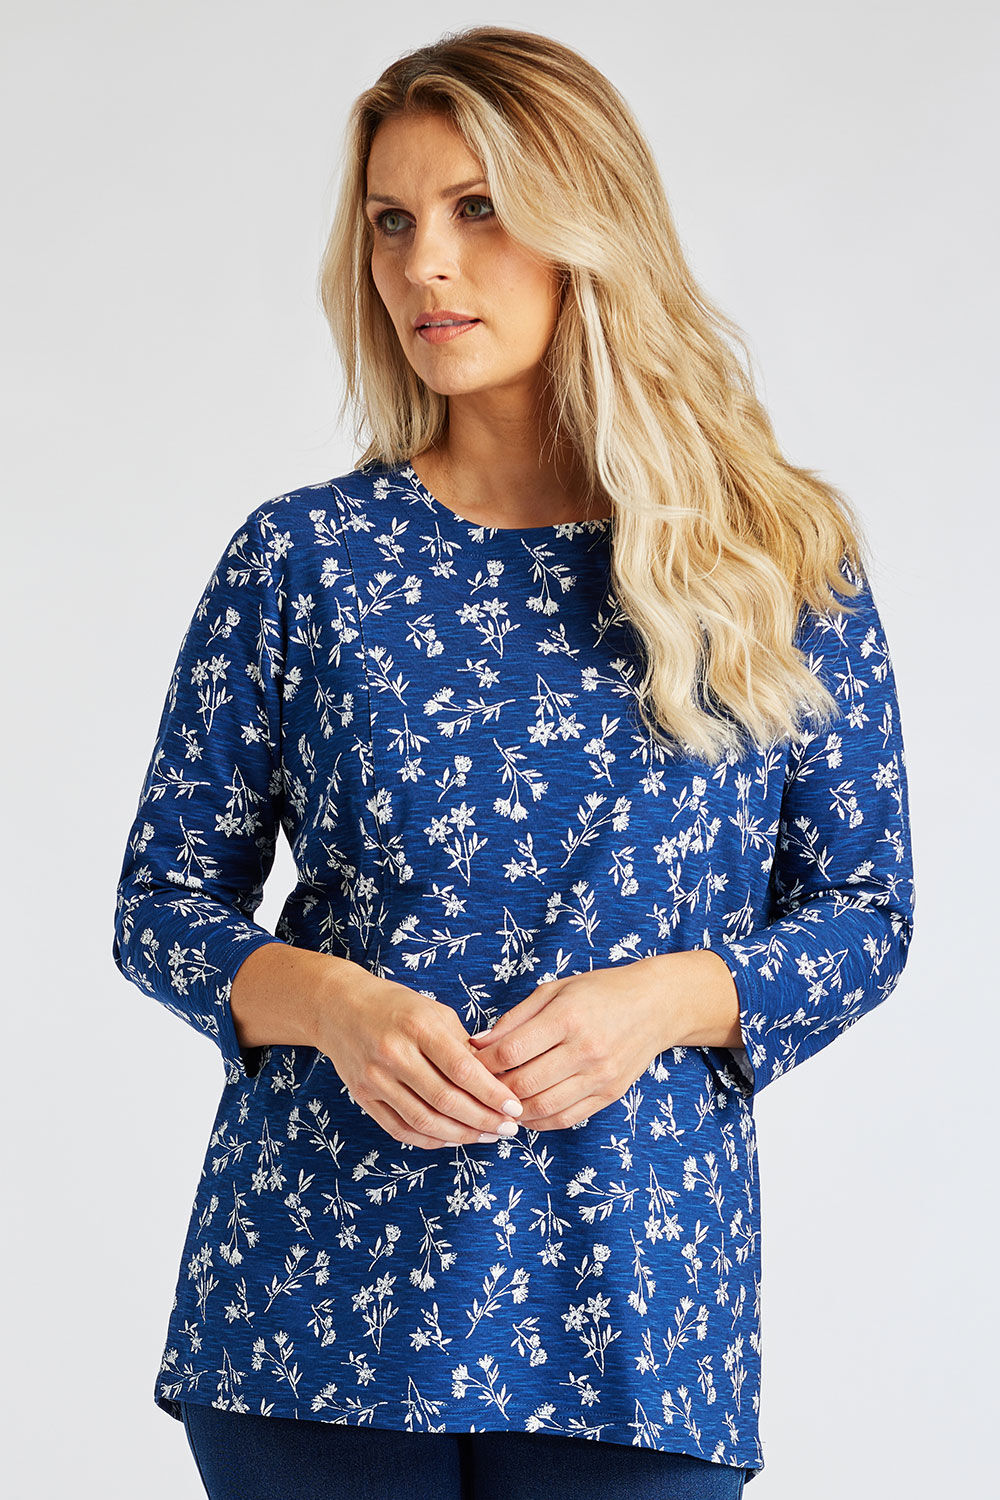 Bonmarche Navy 3/4 Sleeve Floral Sprig Tunic With Pocket Detail, Size: 10